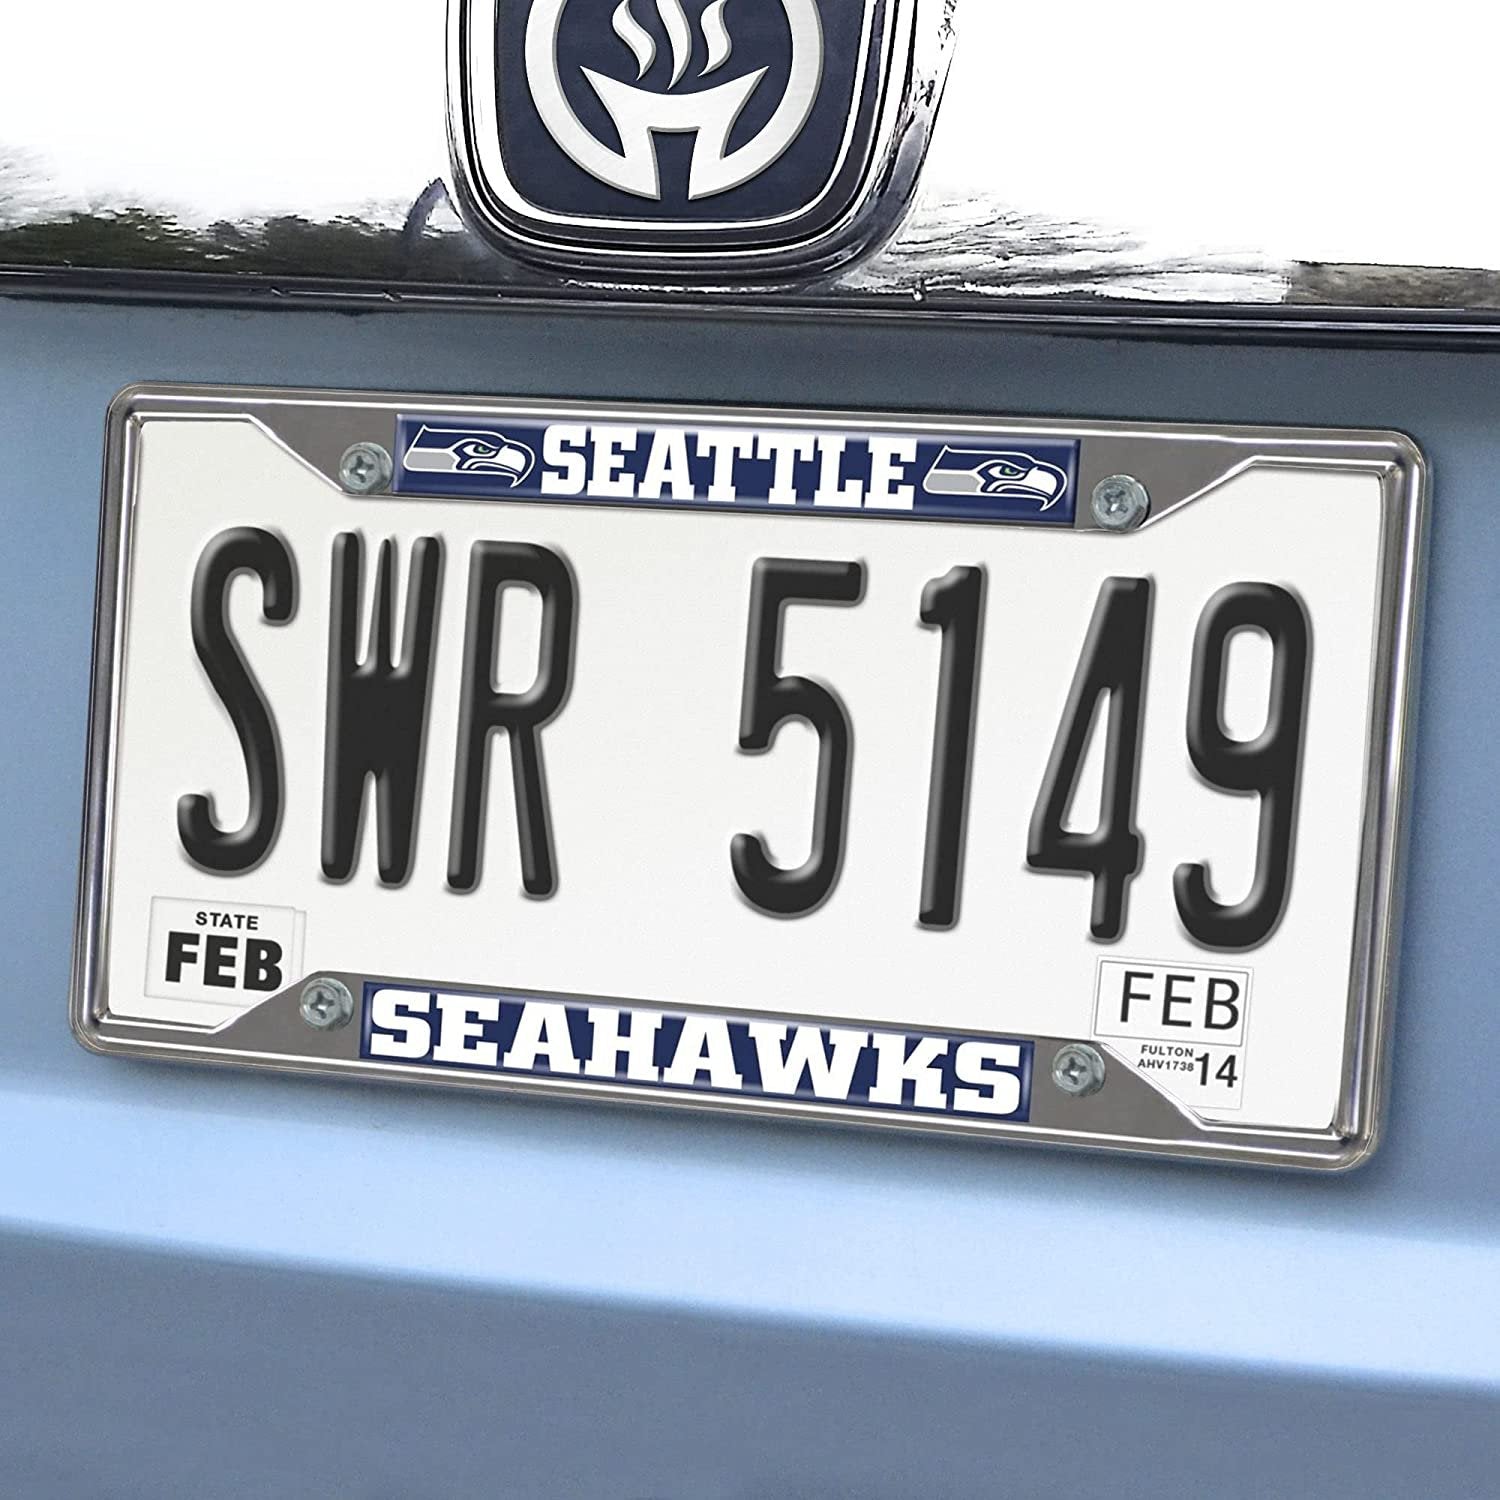 Seattle Seahawks Metal License Plate Frame Chrome Tag Cover 6x12 Inch